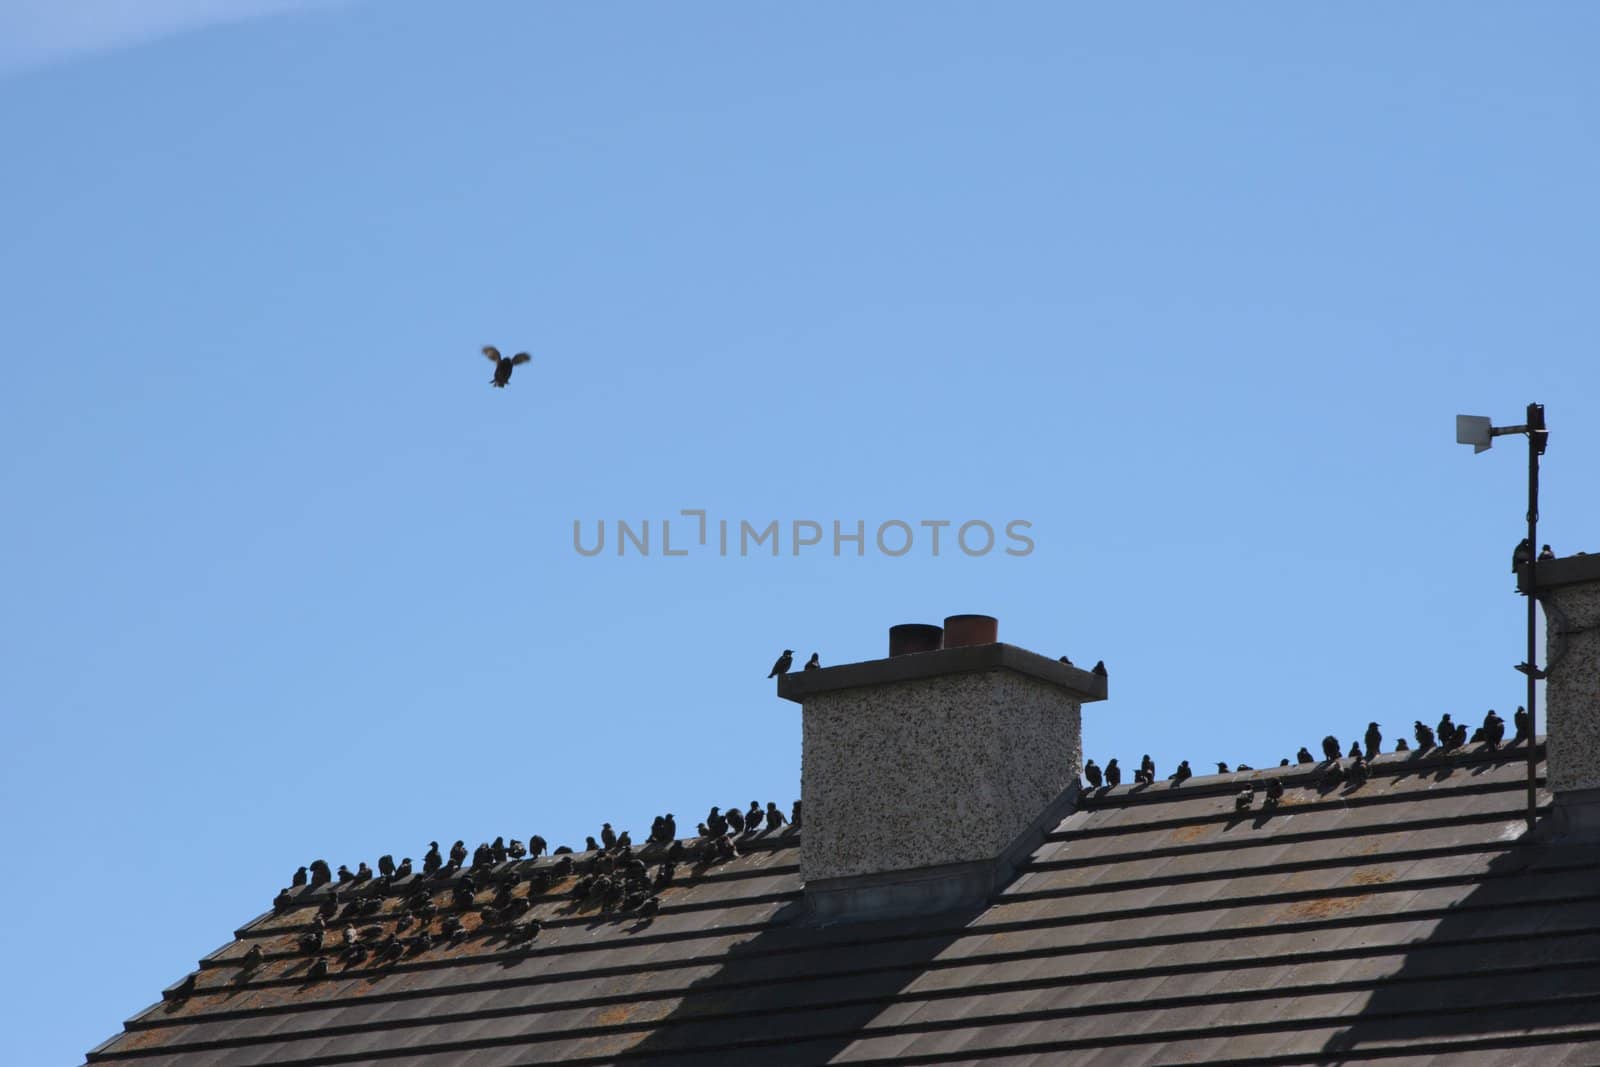 birds on a roof vi by morrbyte